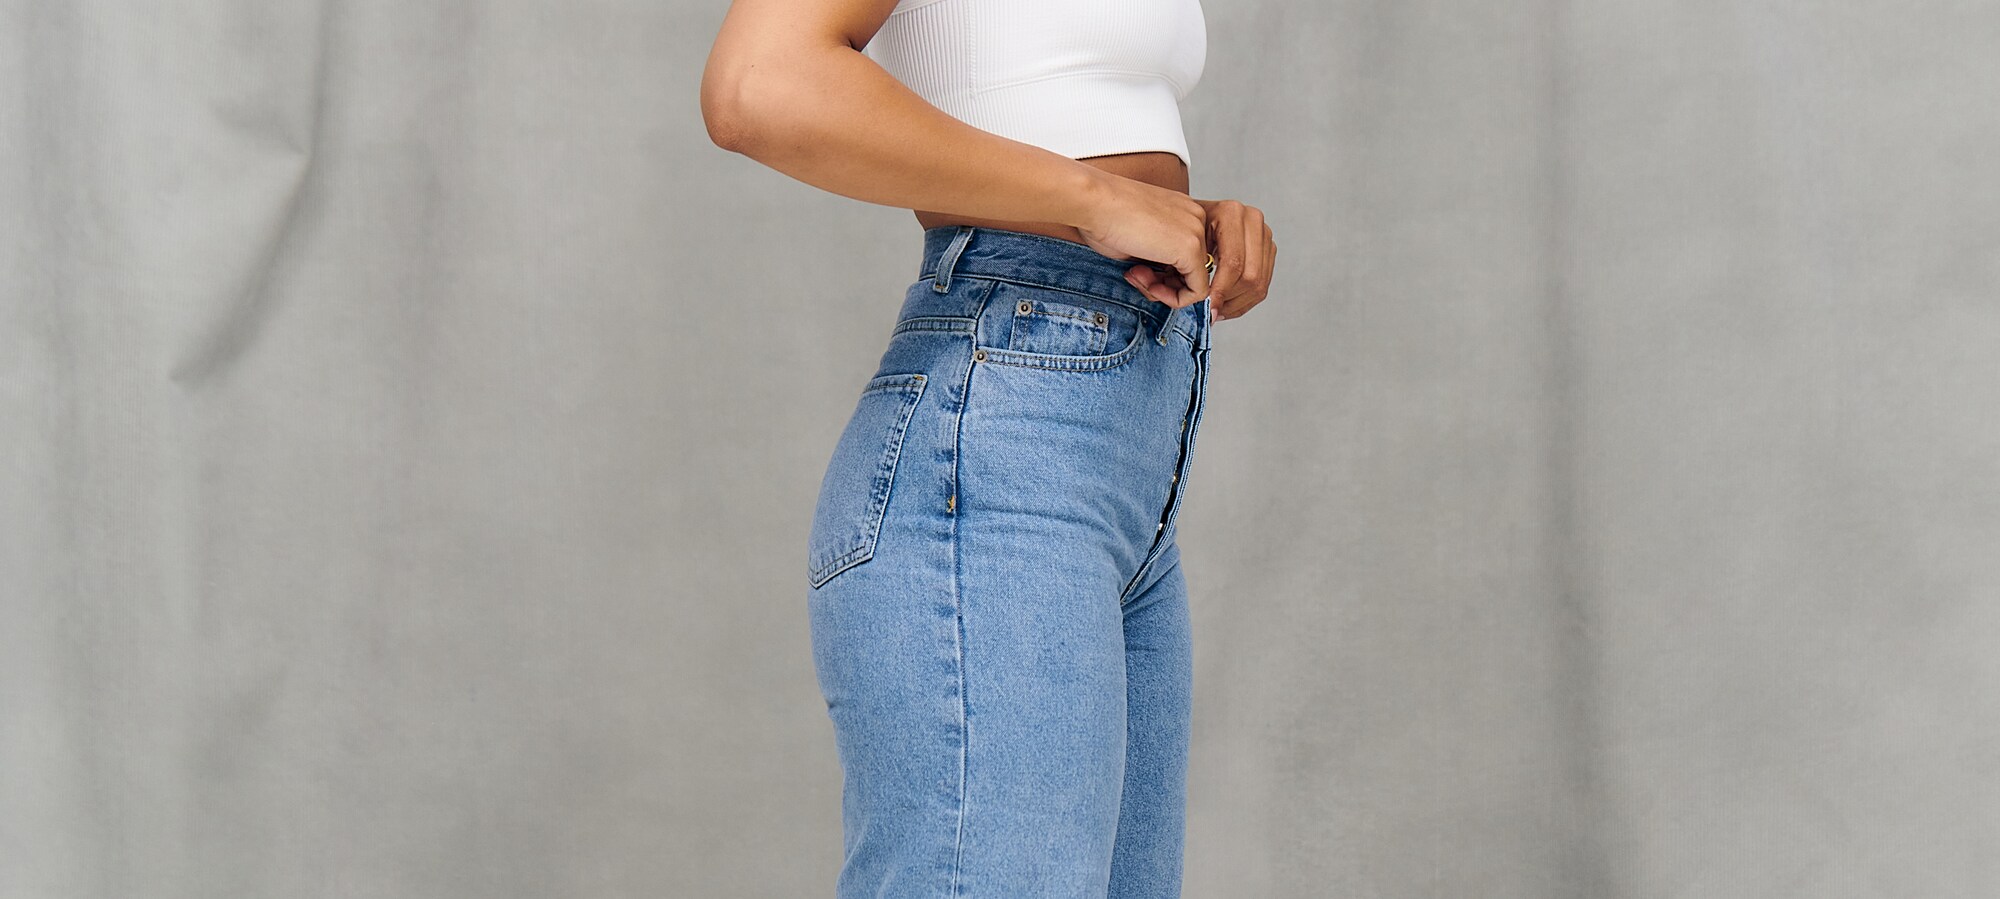 Tips, tricks and size charts for taking your measurements How to find your perfect jeans size